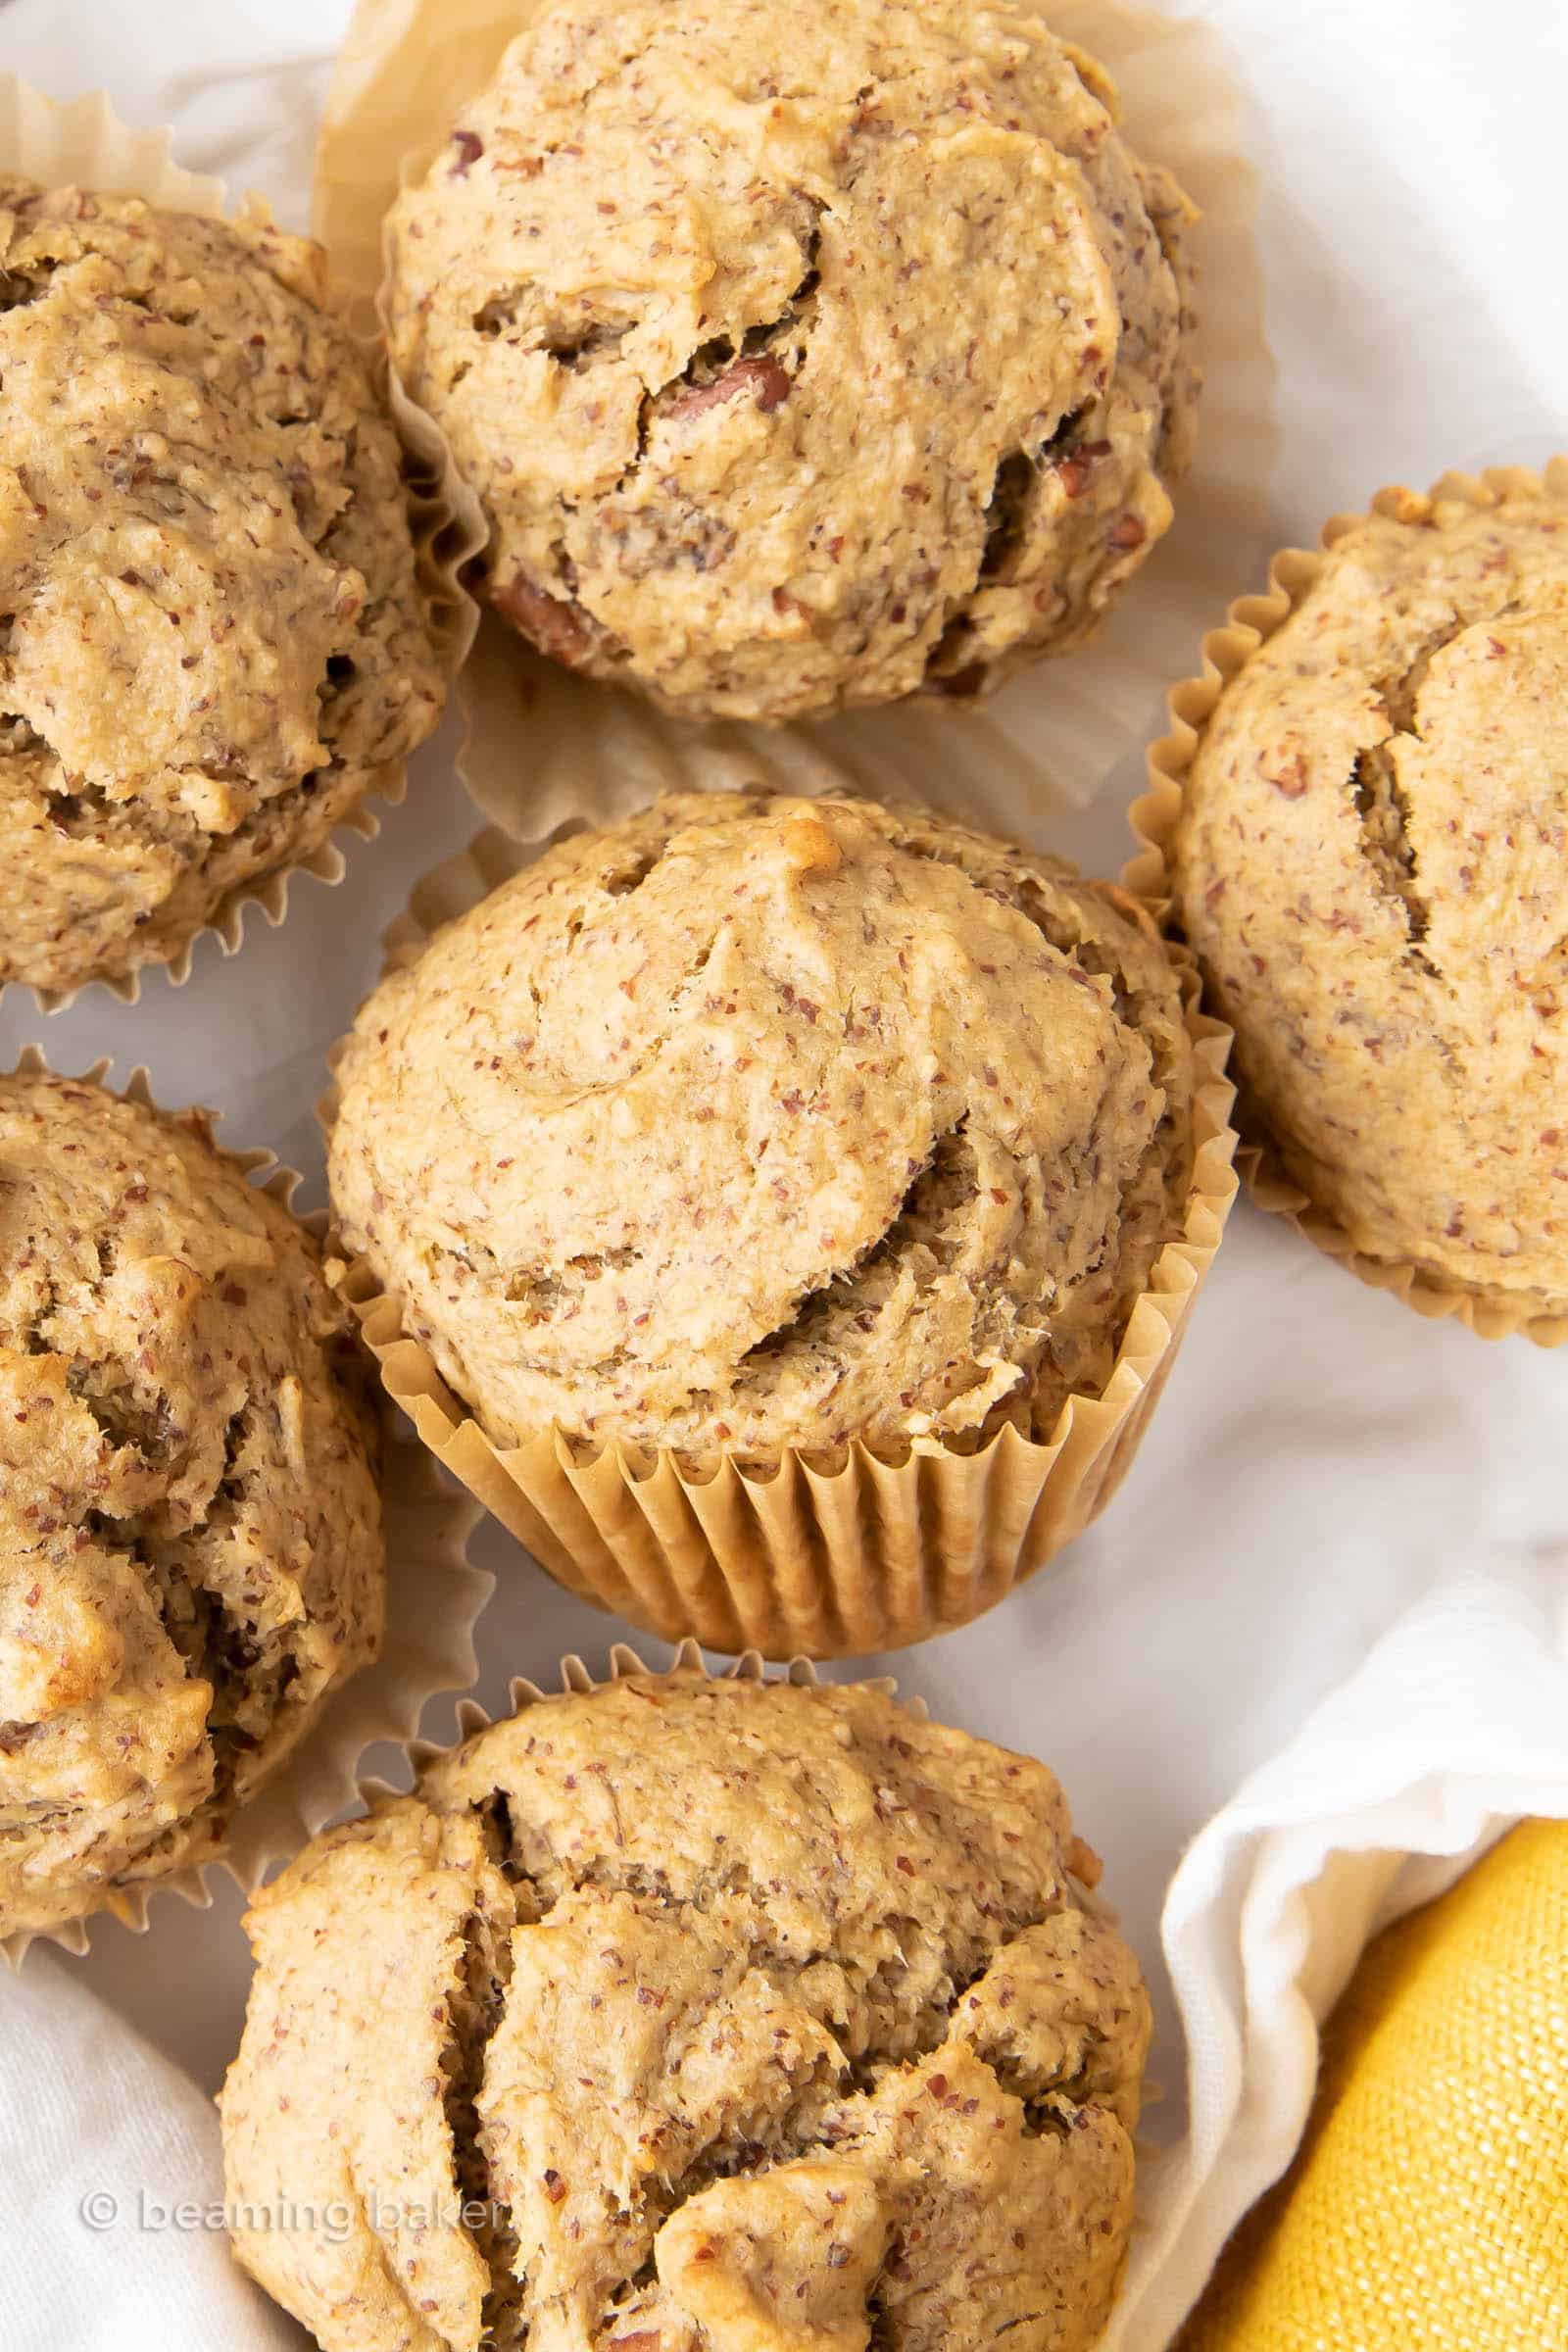 Healthy Banana Muffins Recipe: the BEST healthy banana muffins—secretly healthy, soft ‘n dense banana bread-style muffins with lightly sweet, comforting banana flavor. Made with healthy, whole ingredients. #HealthyMuffins #Banana #Muffins #BananaMuffins | Recipe at BeamingBaker.com